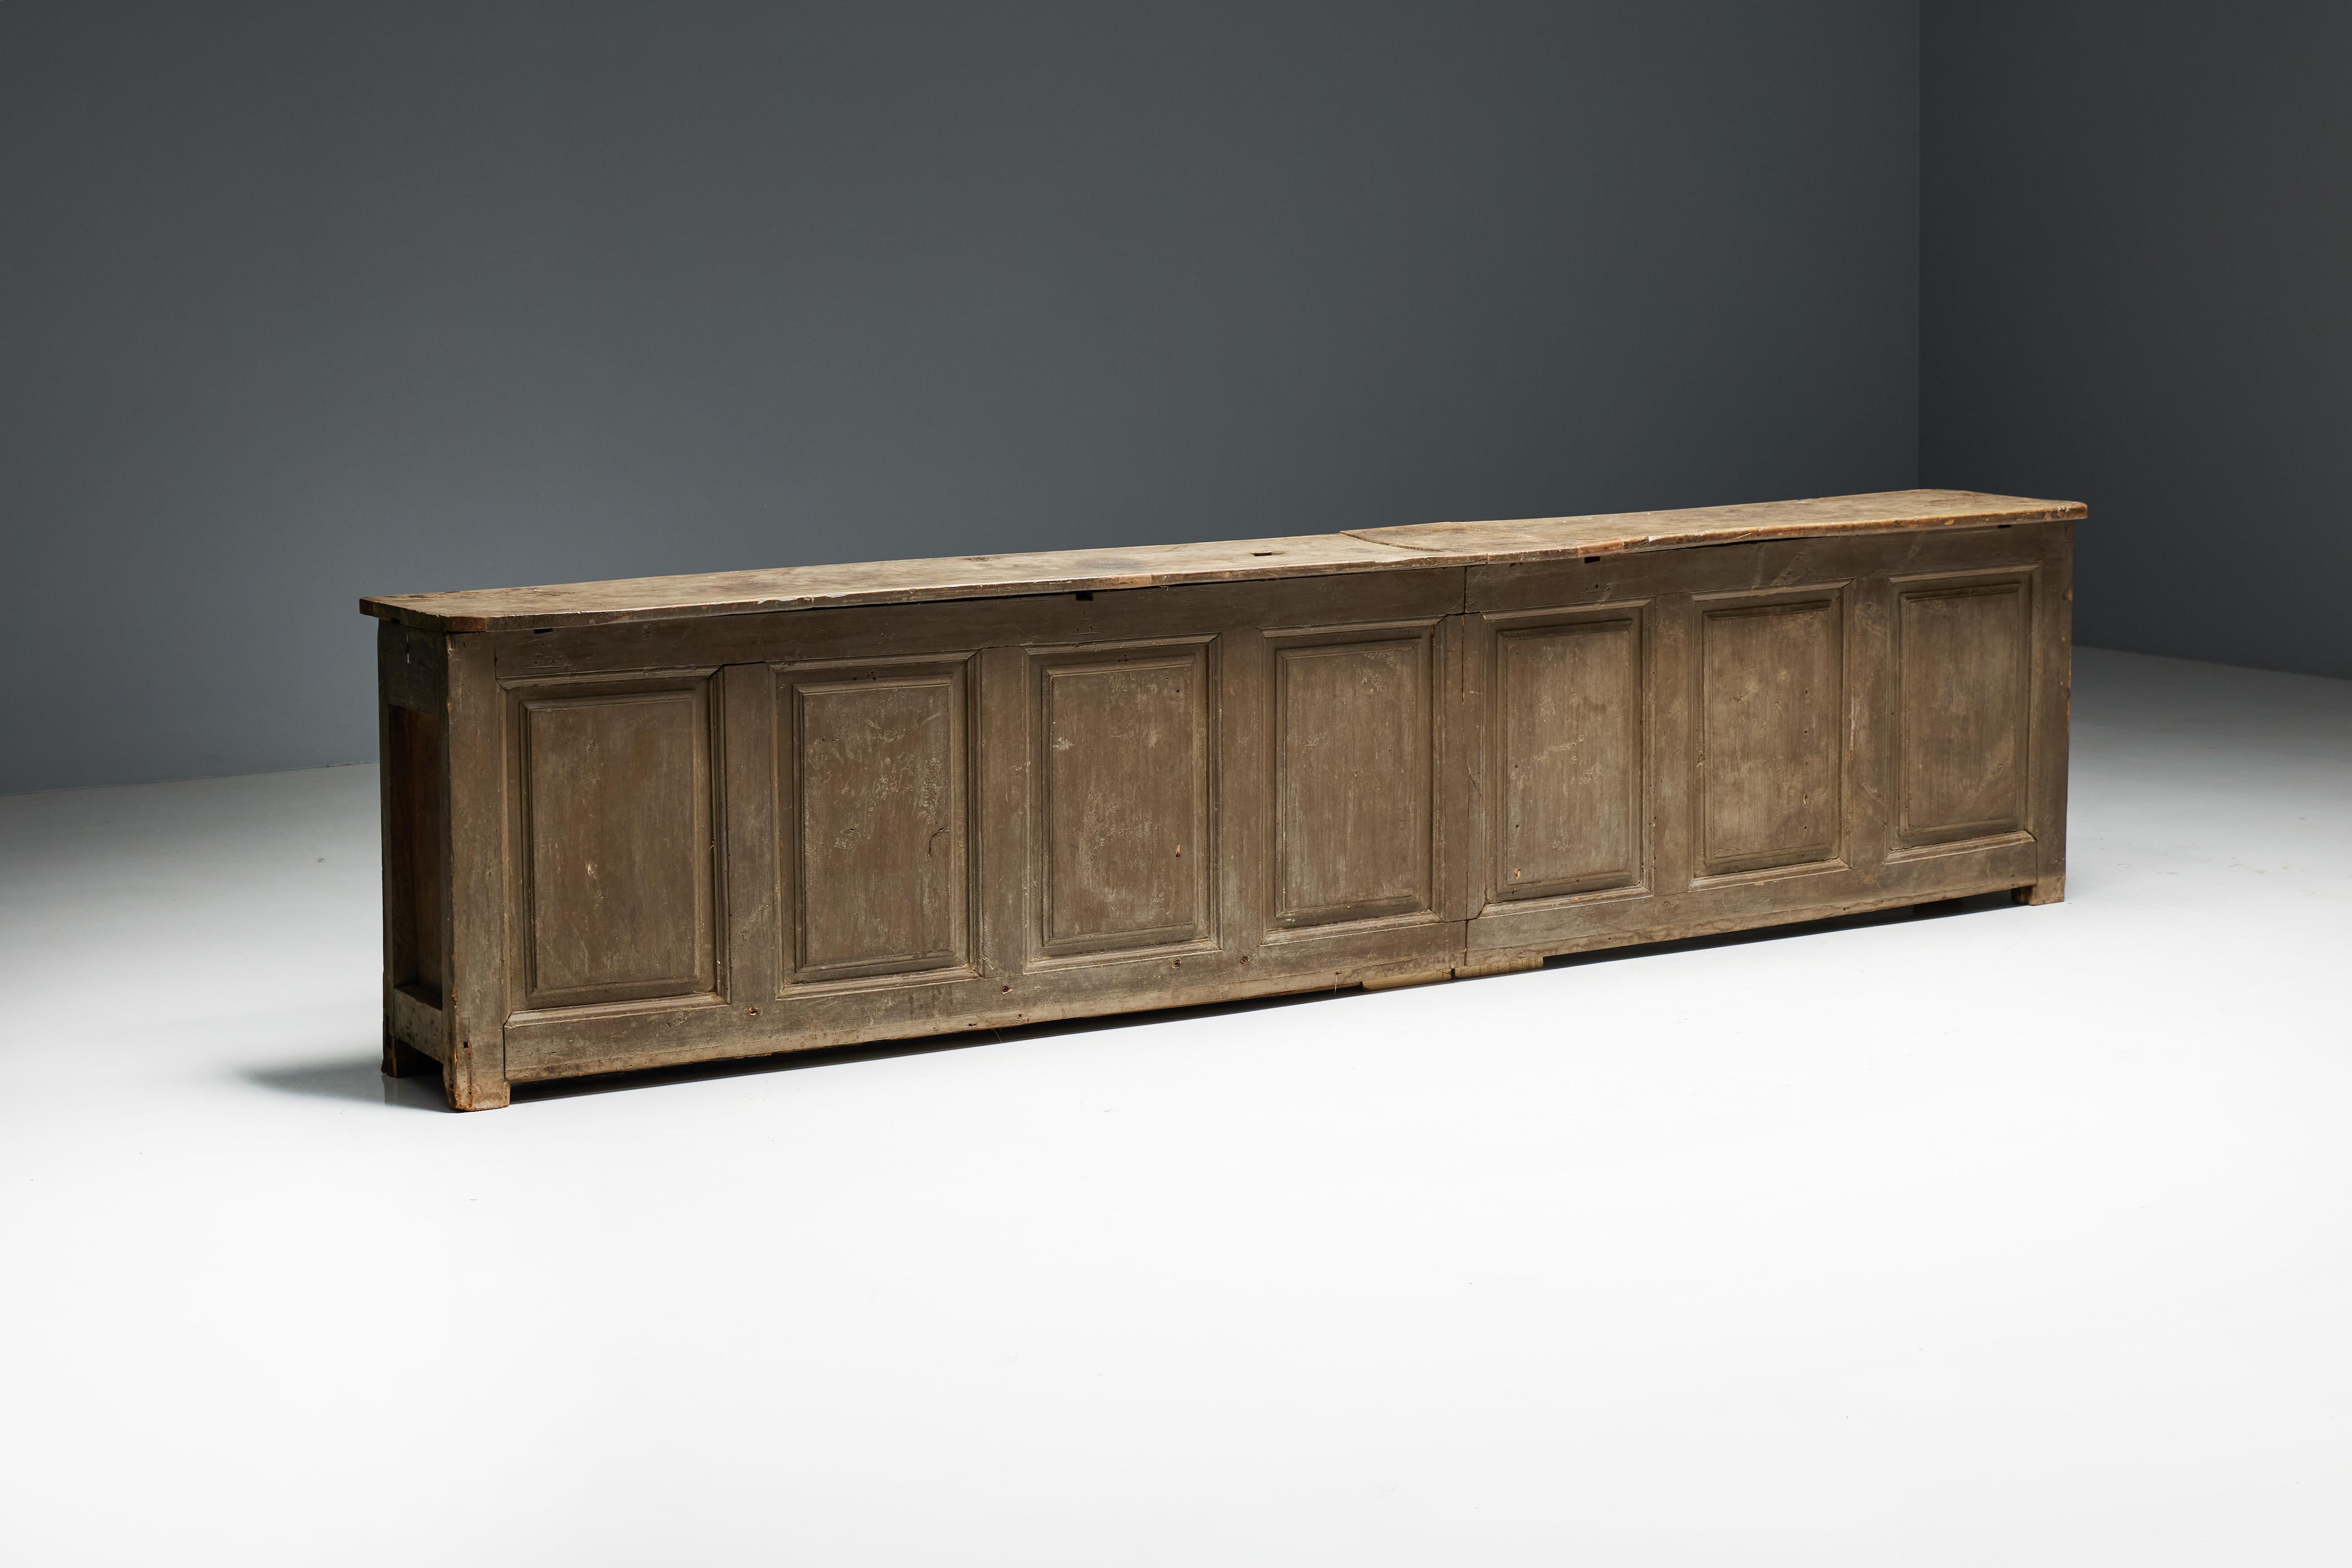 Rustic Art Populaire Freestanding Bar Counter, France, 19th Century 7